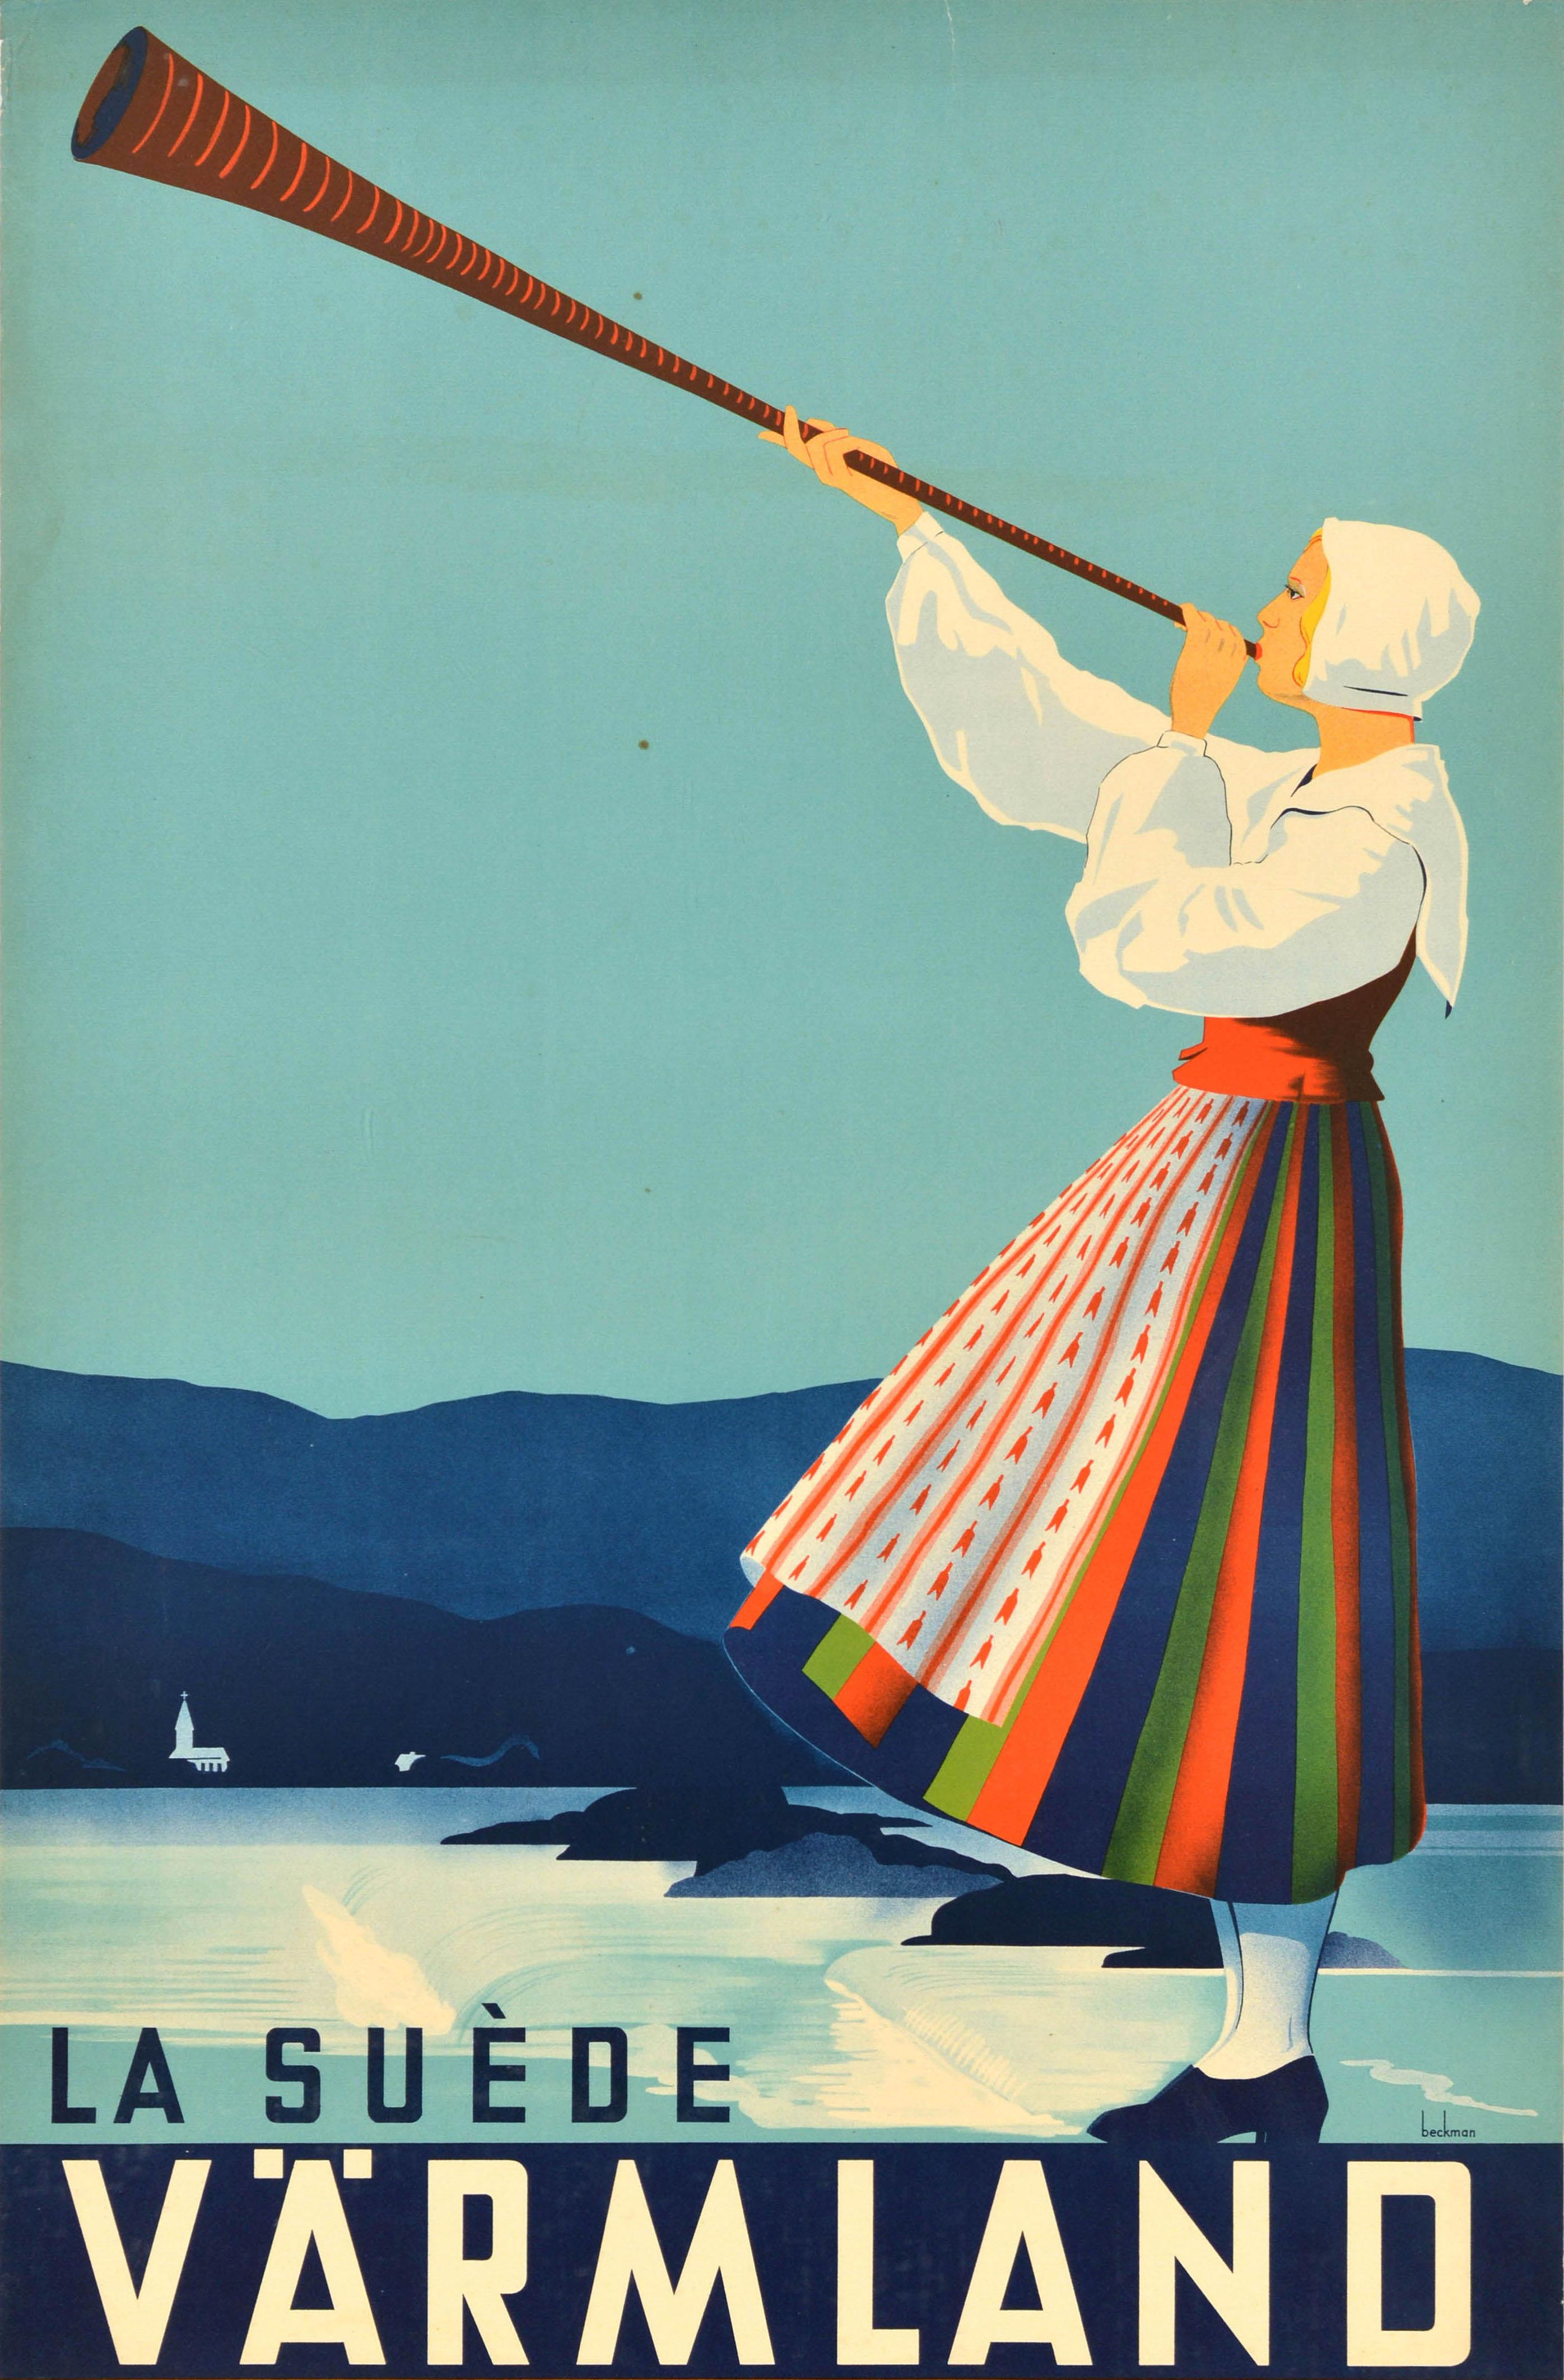 Original vintage travel advertising poster for La Suede Varmland Terre Promise du Touriste / Varmland Sweden The Promised Land for Tourists featuring an illustration by Anders Beckman (1907-1967) depicting a lady in a traditional Swedish dress